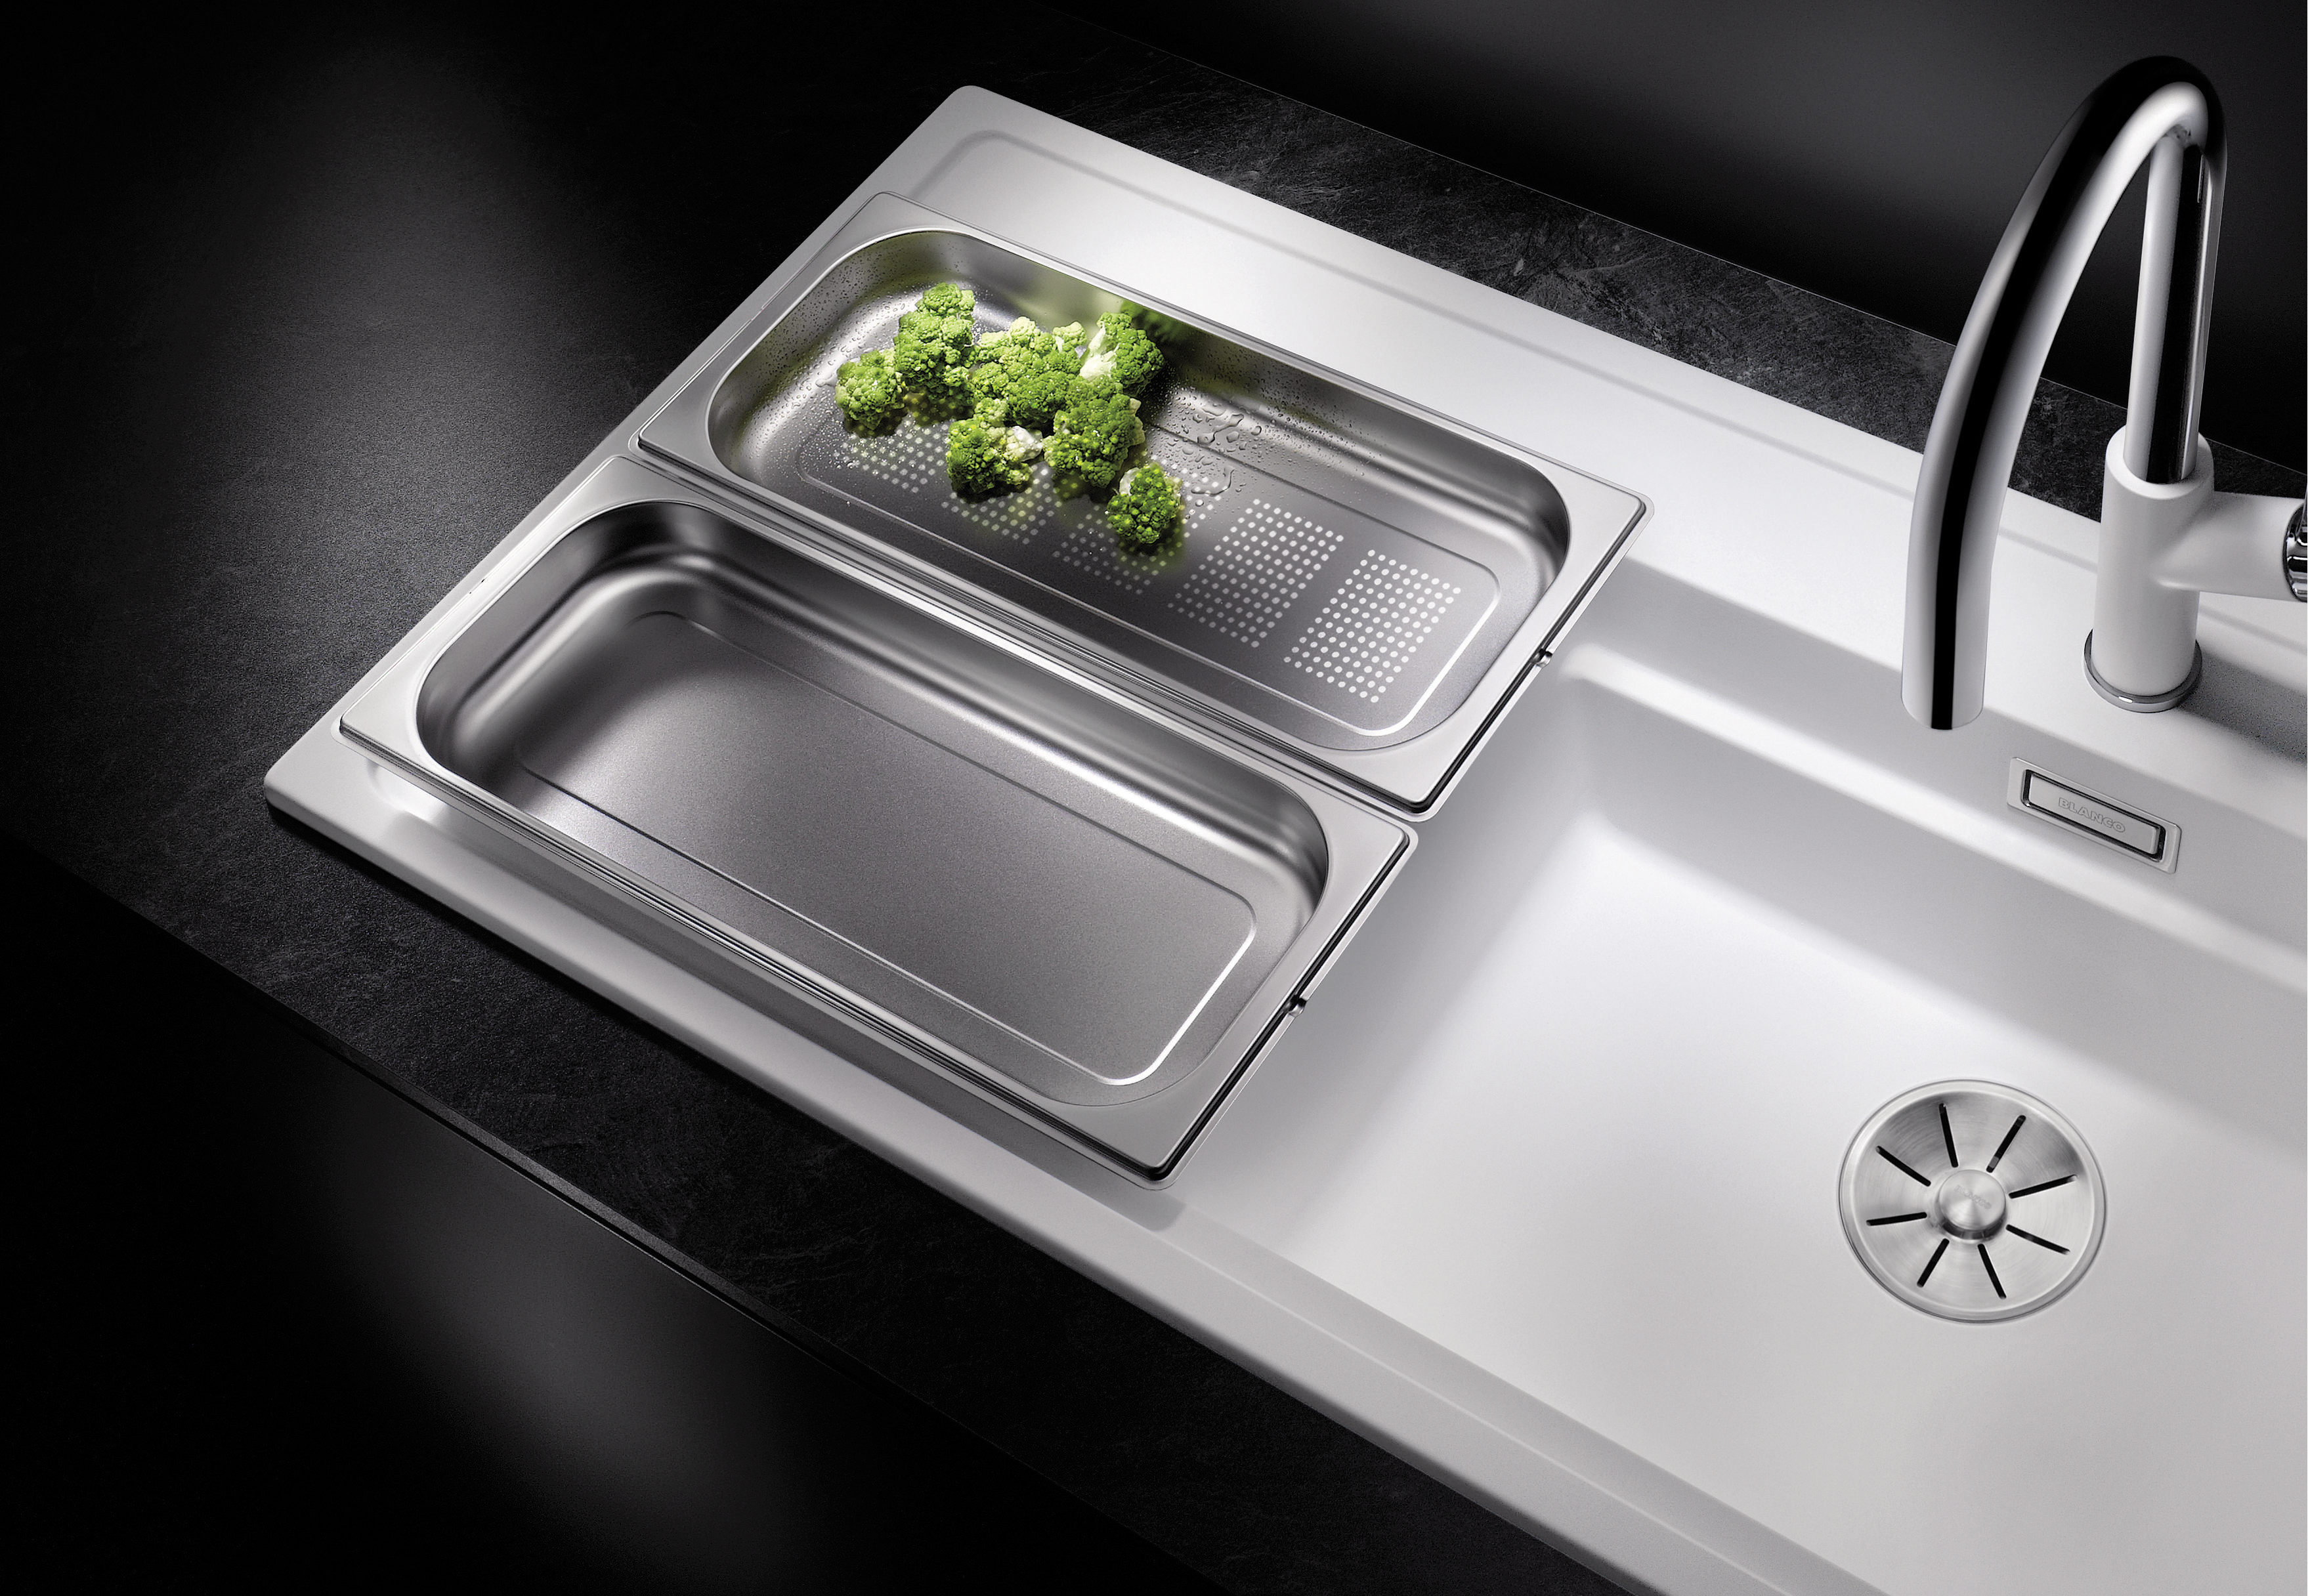 The spacious drainer also means that you won’t need to put hot containers down on the worktop